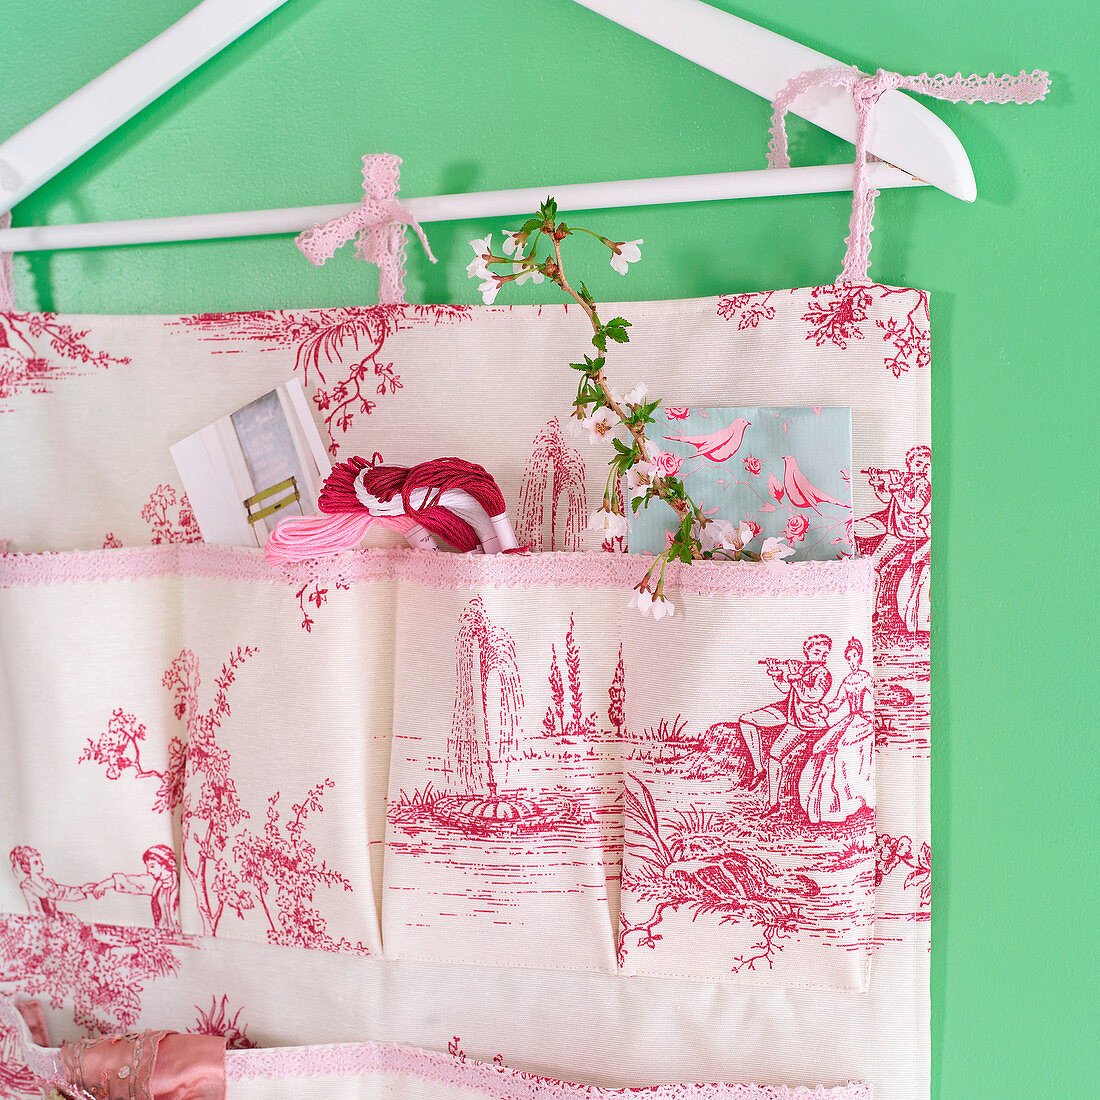 Hand-sewn organiser made from toile-de-jouy fabric hanging from clothes hanger